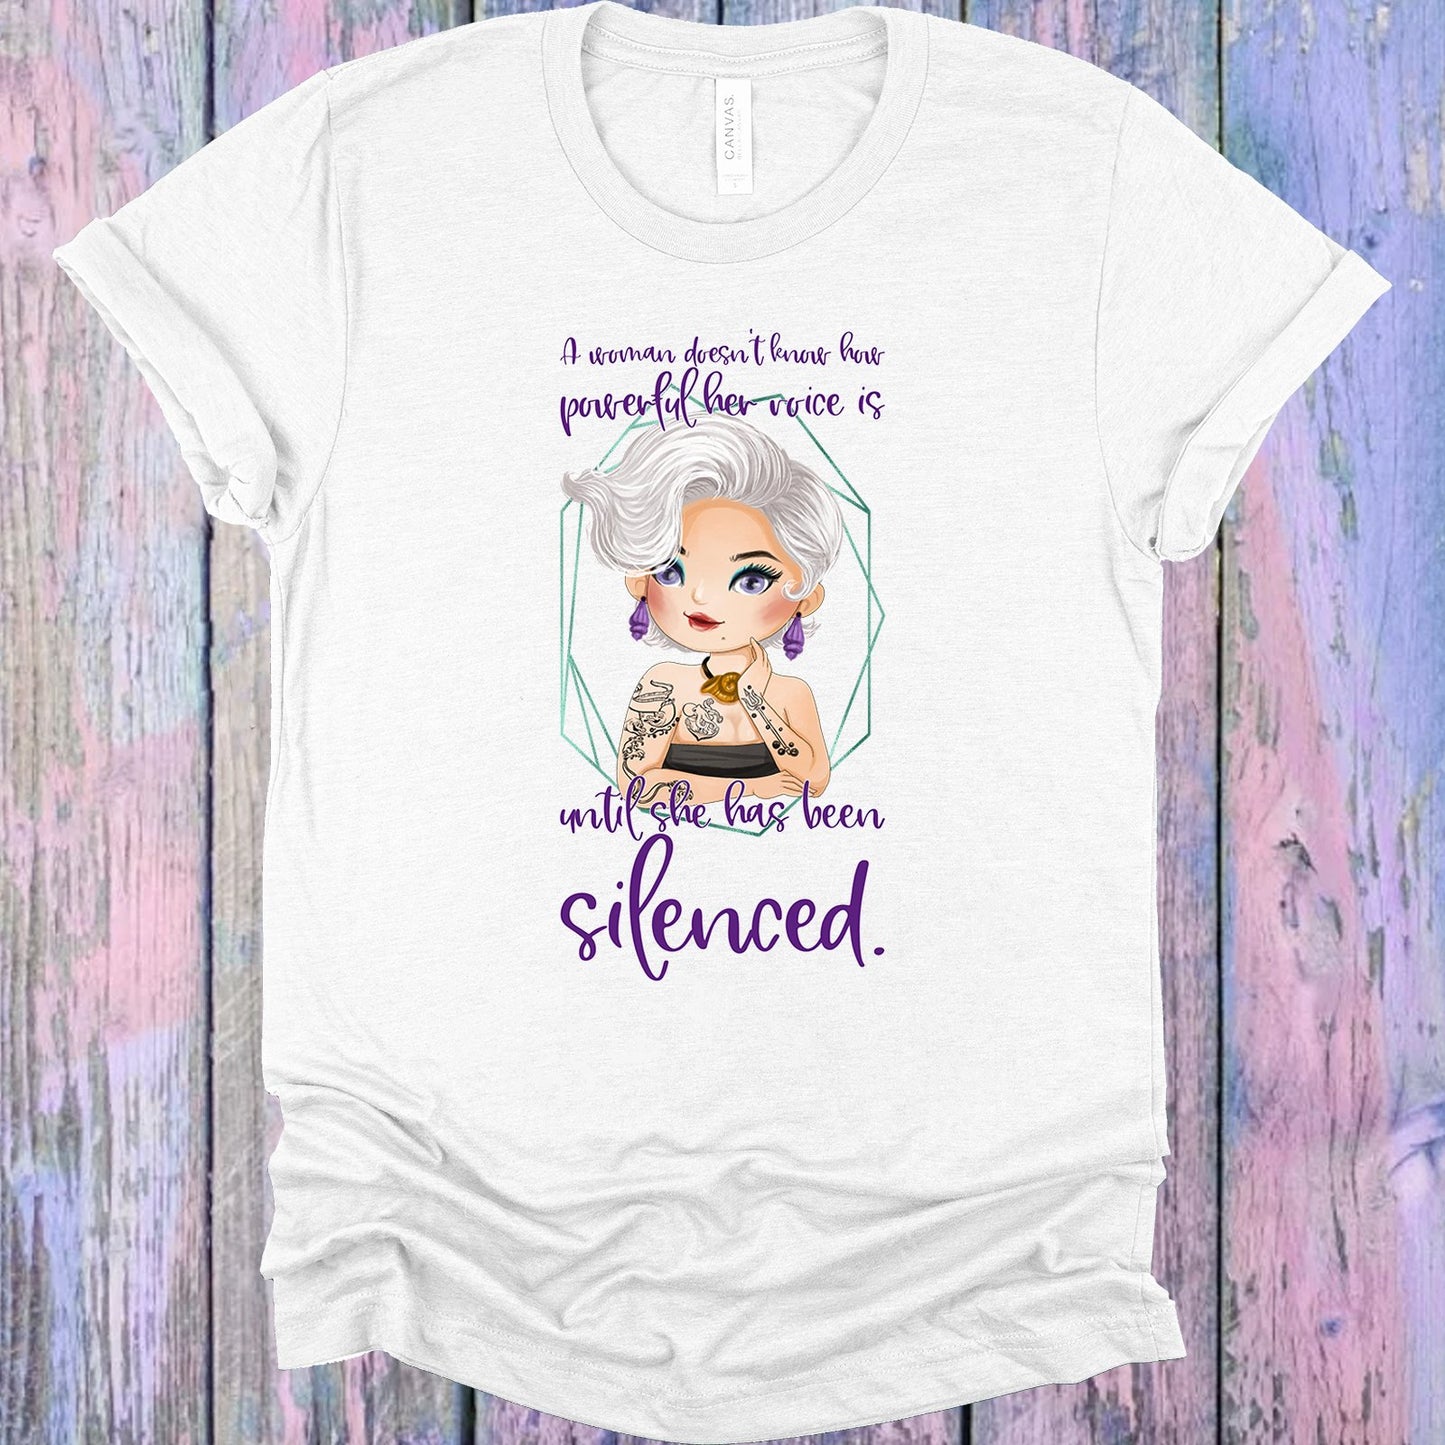 A Woman Doesnt Know How Powerful Her Voice Is Until She Has Been Silenced Graphic Tee Graphic Tee